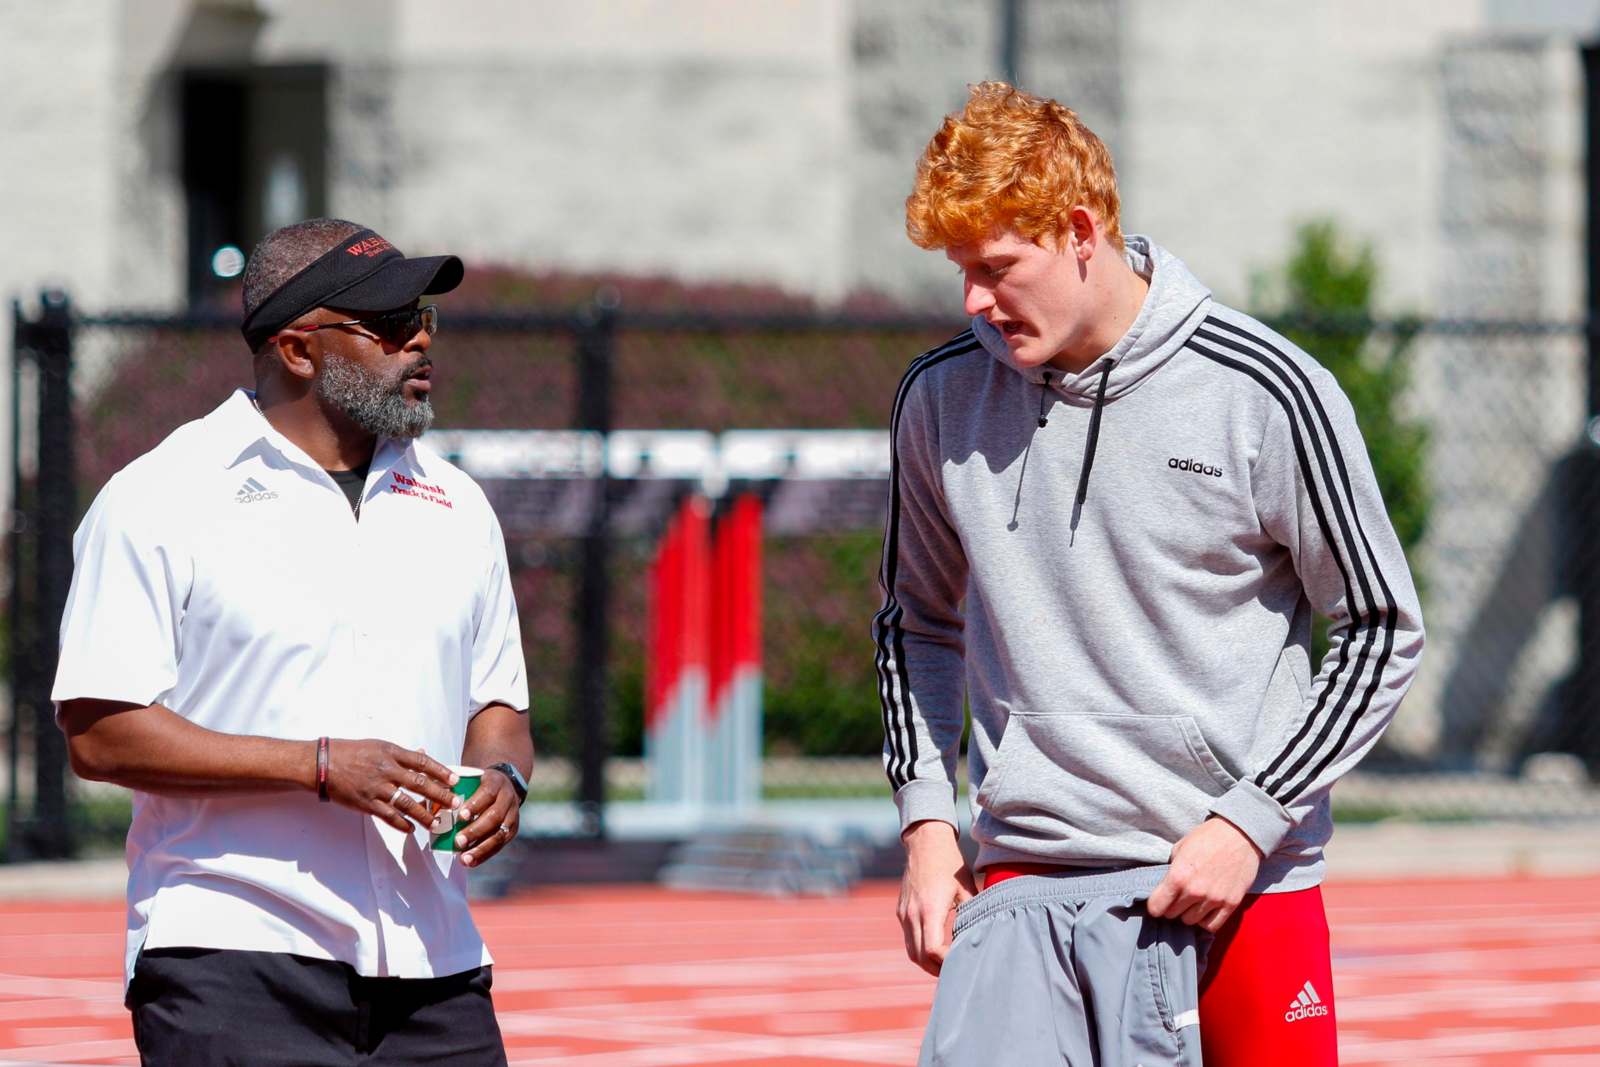 a man talking to another man on a track